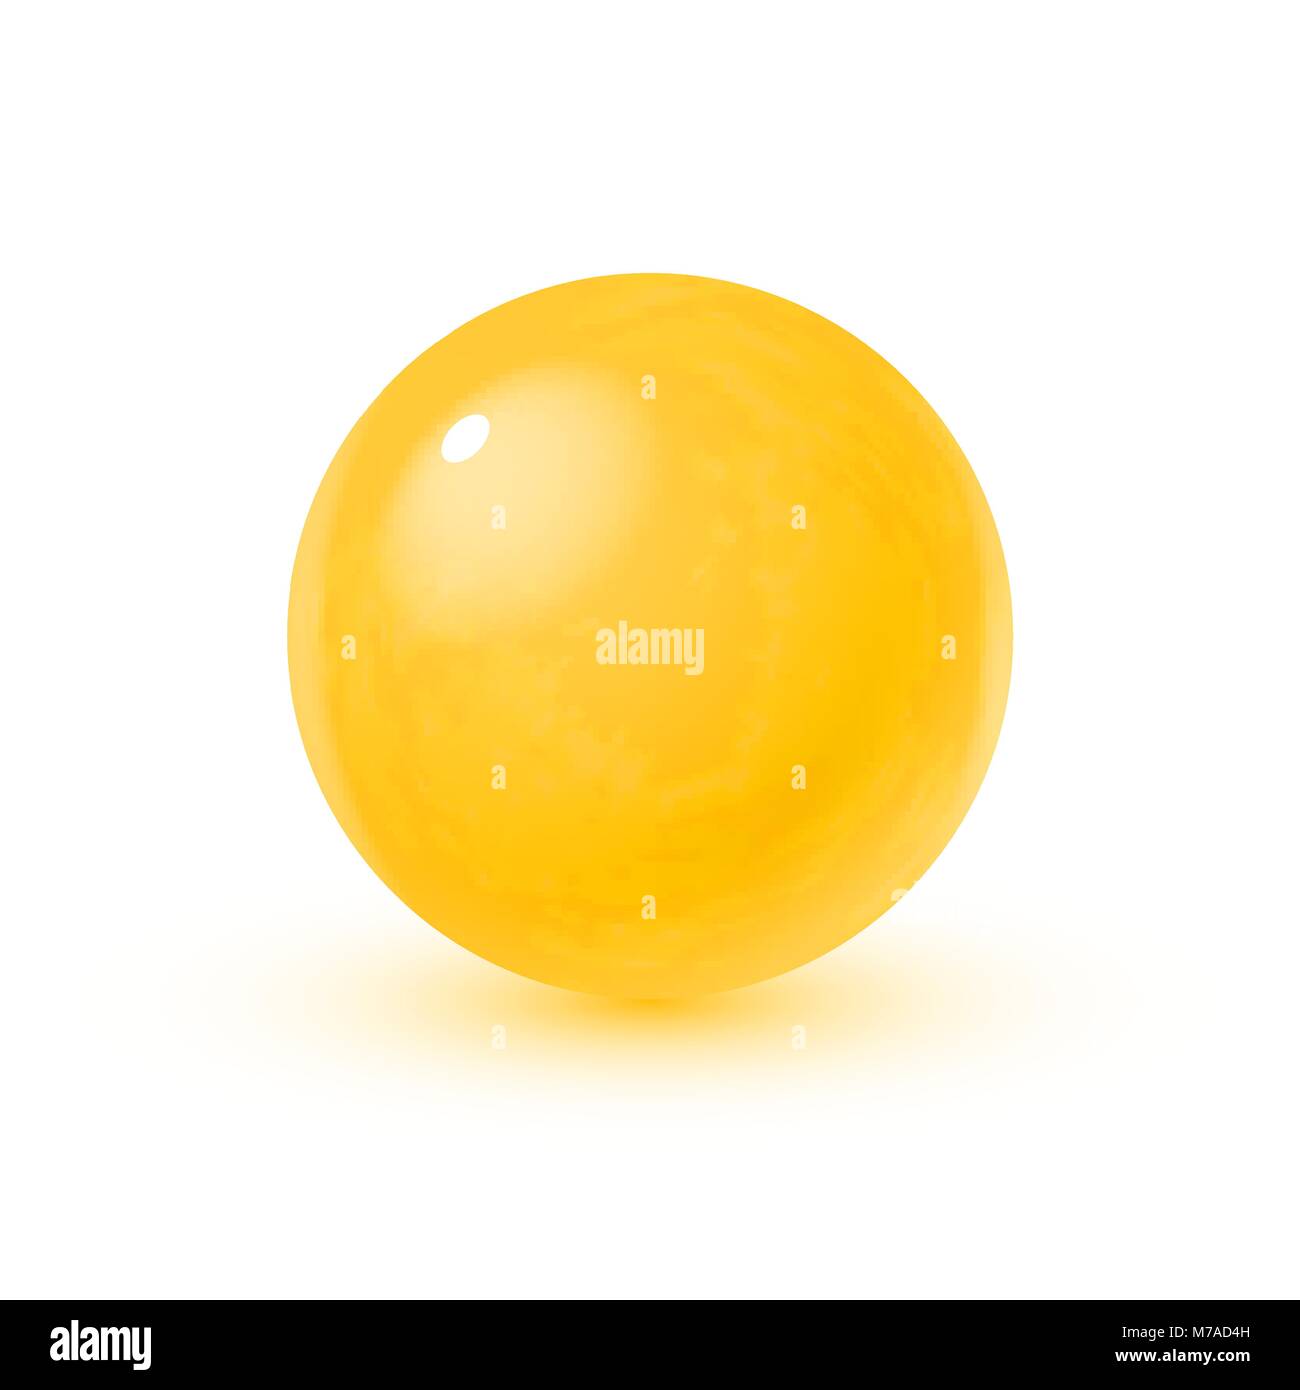 Realistic glass sphere with shadows, reflection of sky in mirror surface of yellow pearl, 3D vector illustration isolated on white background Stock Vector